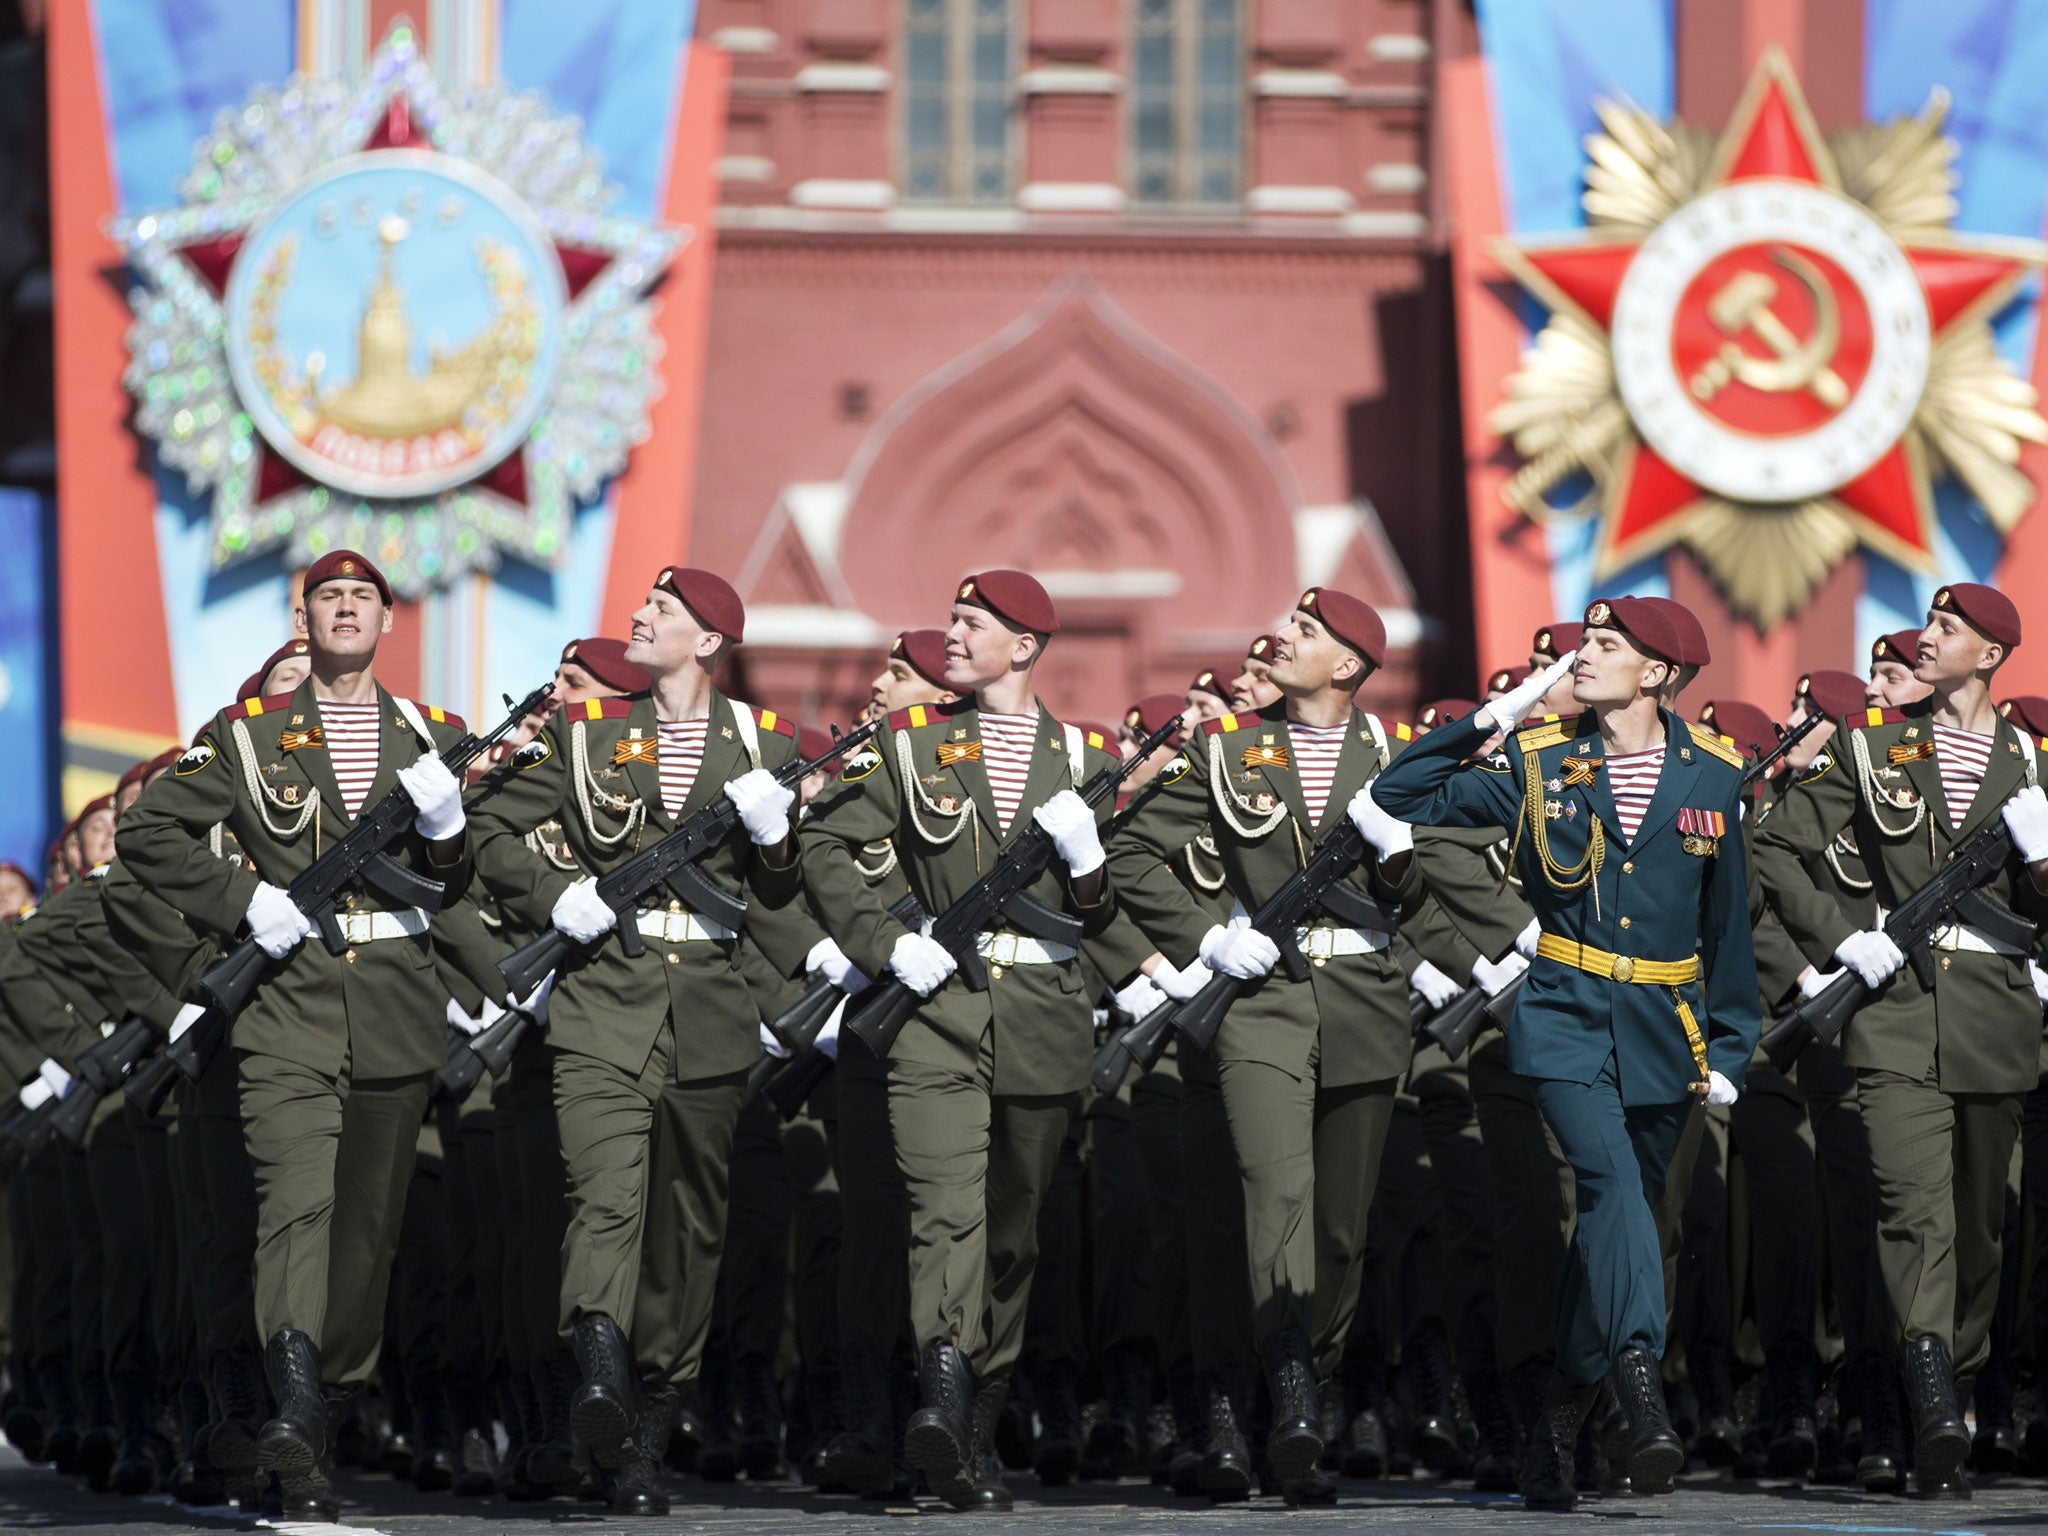 Thousands of Russian troops marched on Red Square in the annual Victory Day parade in a proud display of the nation's military might amid escalating tensions over Ukraine